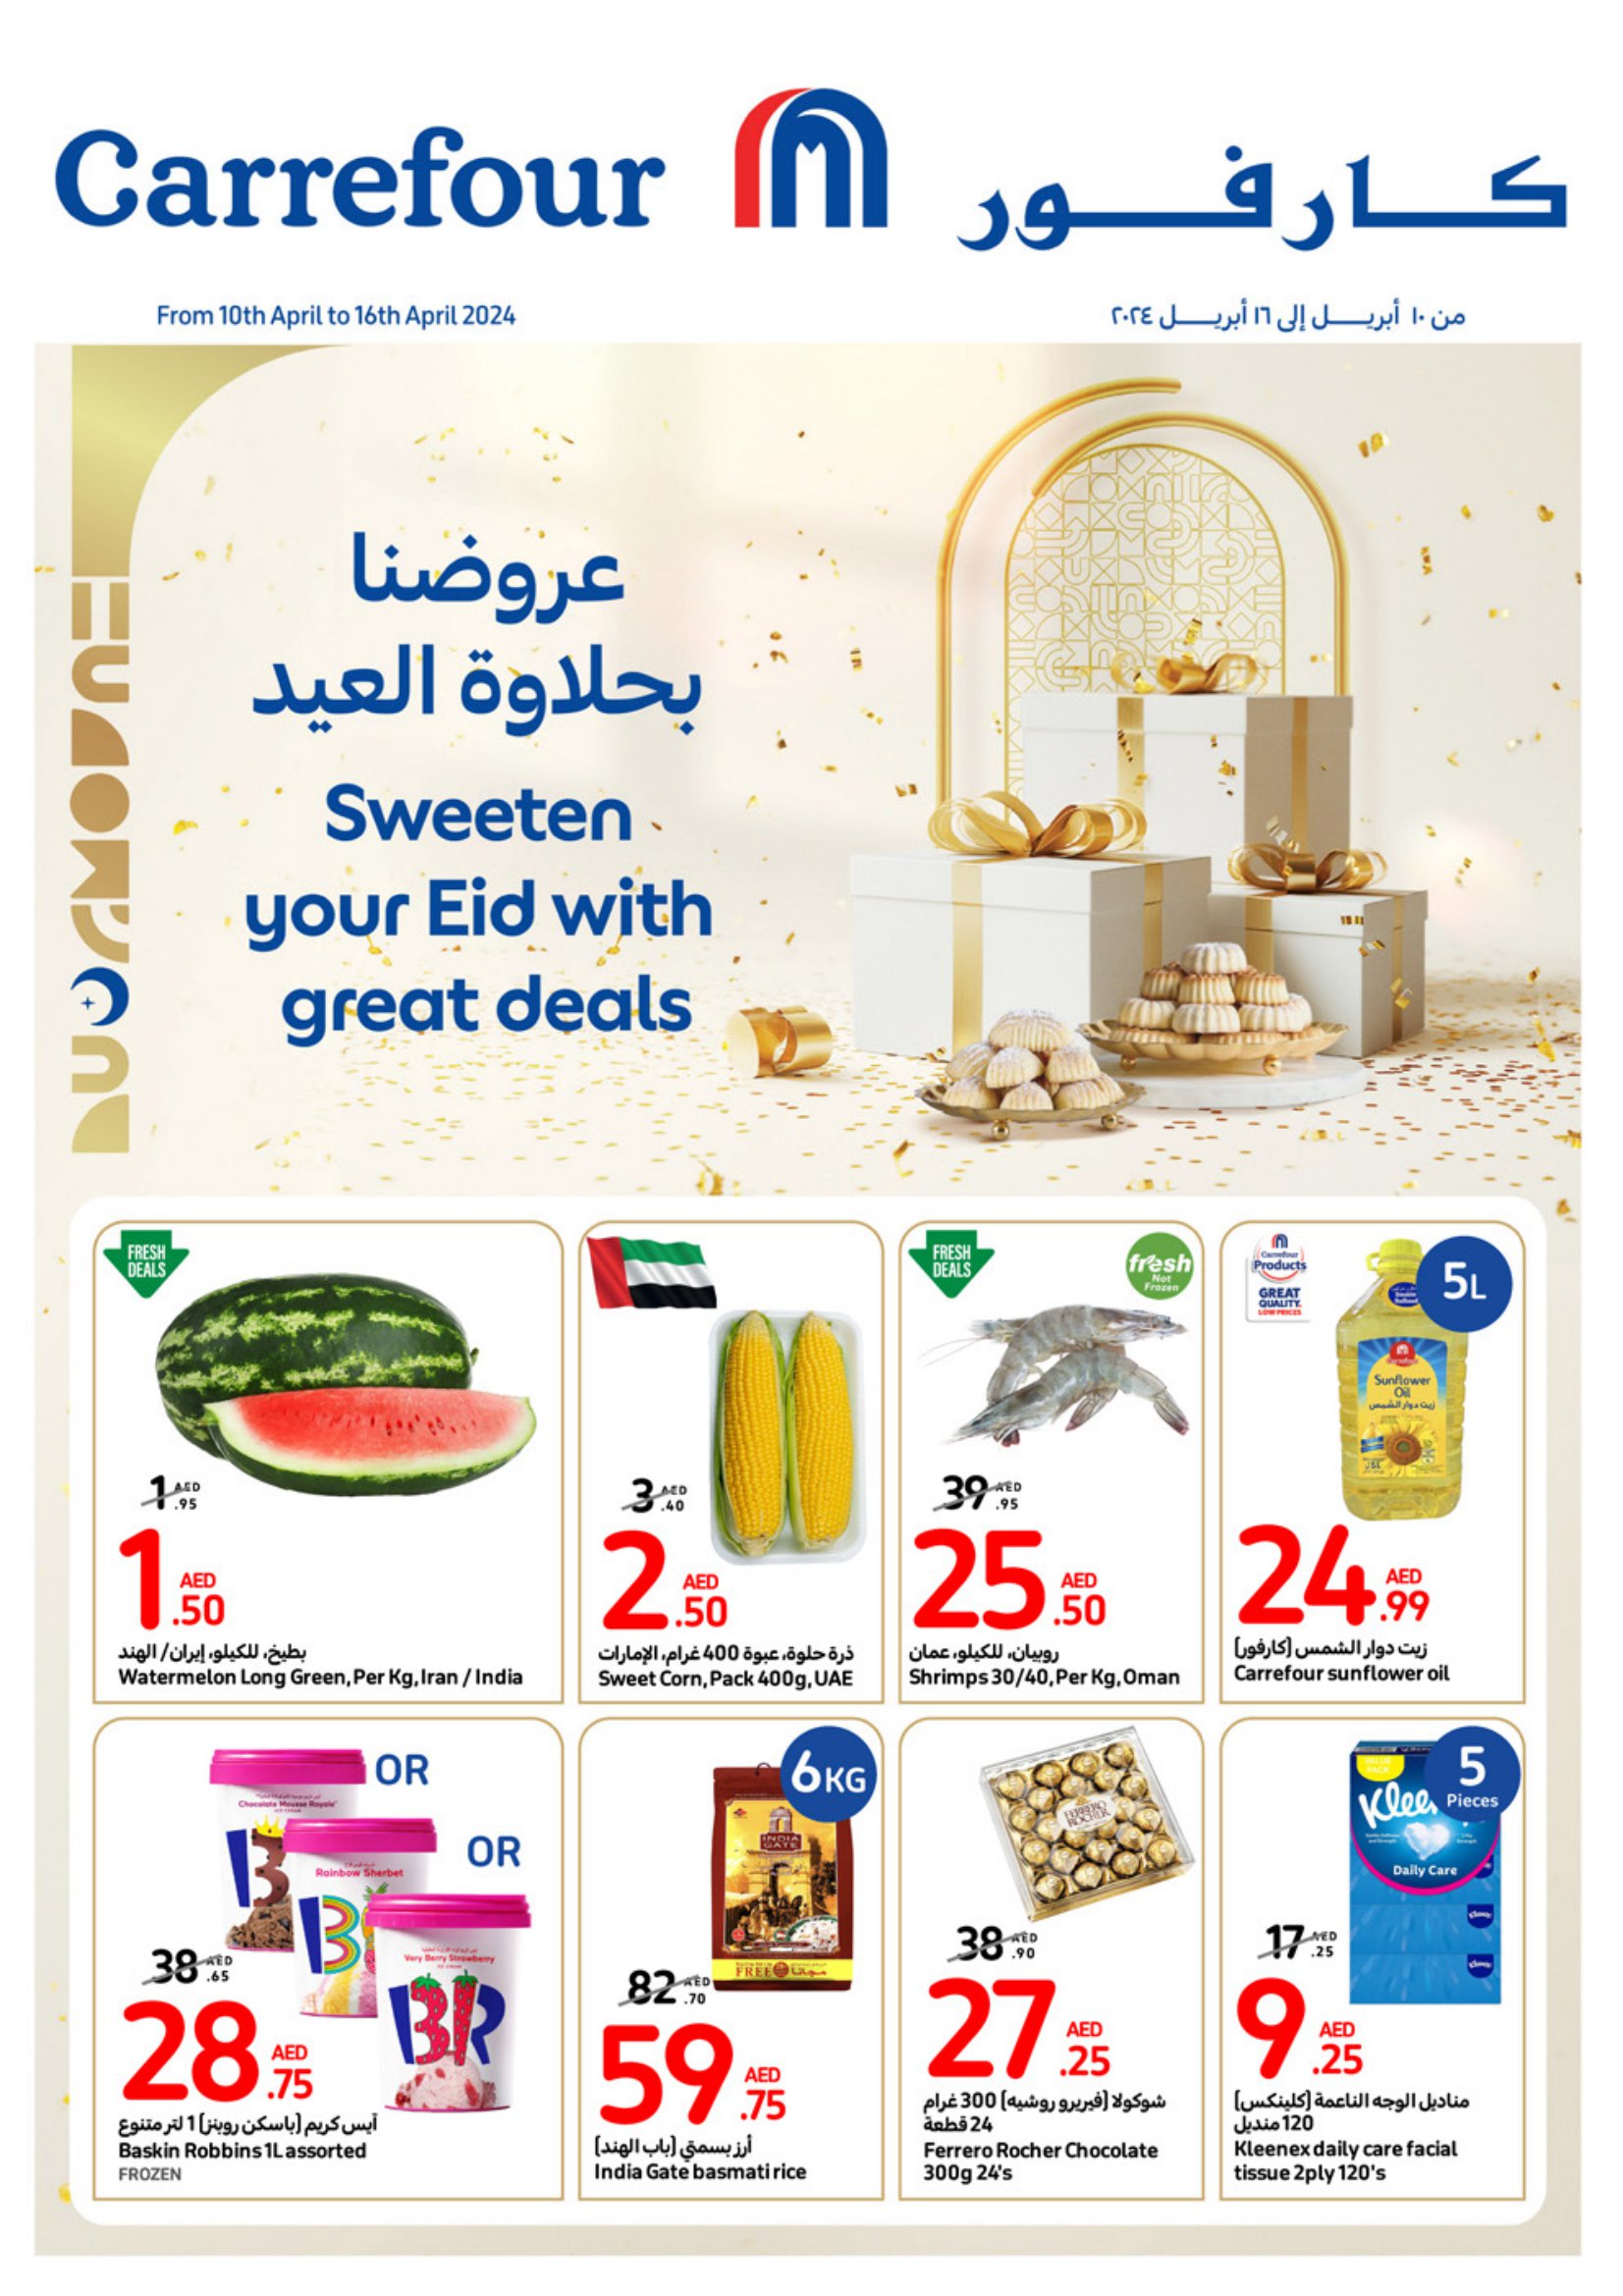 Sweeten Your Eid offers in Carrefour UAE from 10 April to 16 April 2024